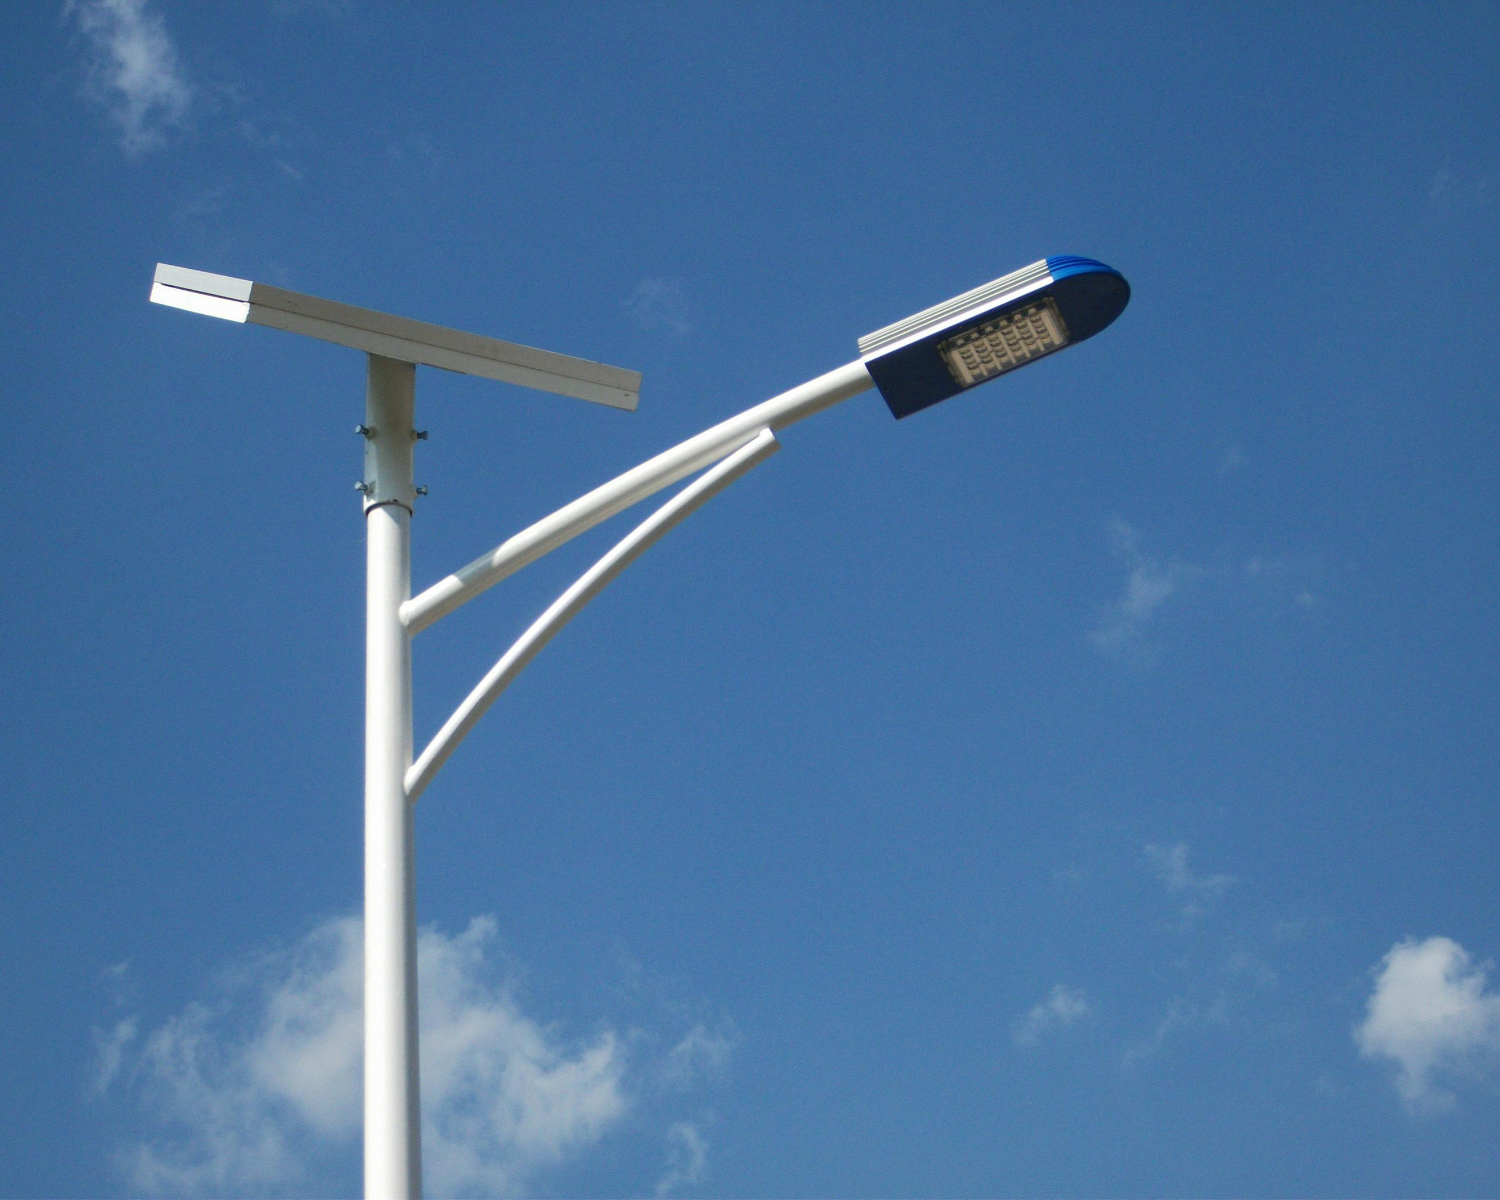 What are the advantages of solar street lamps?